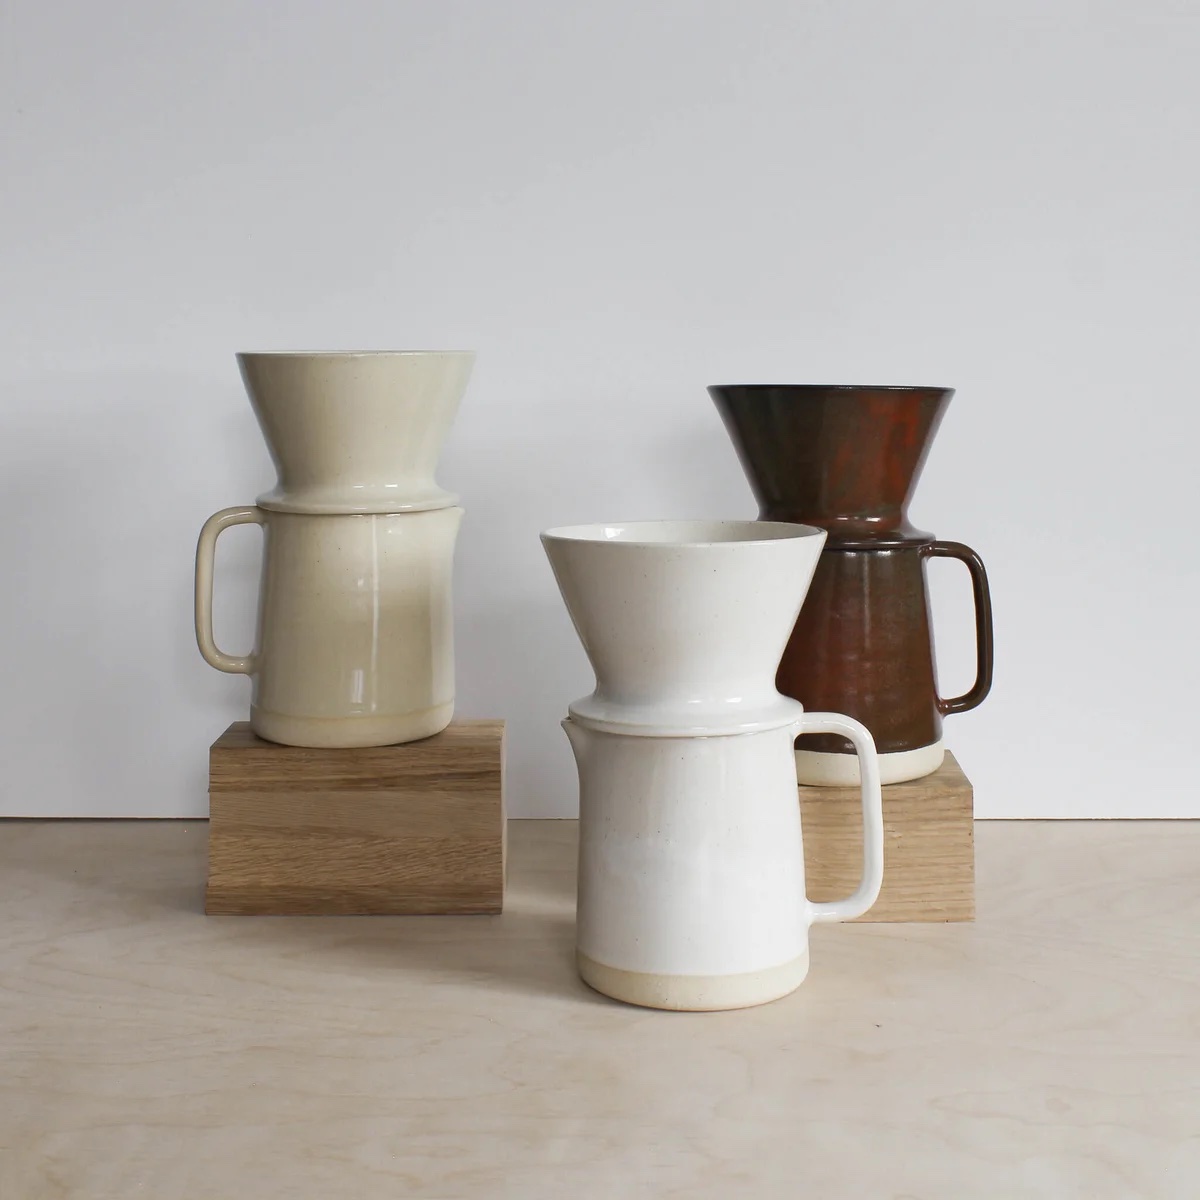 3 pourover coffee sets in white, cream and dark brown, displayed with small wooden boxes.